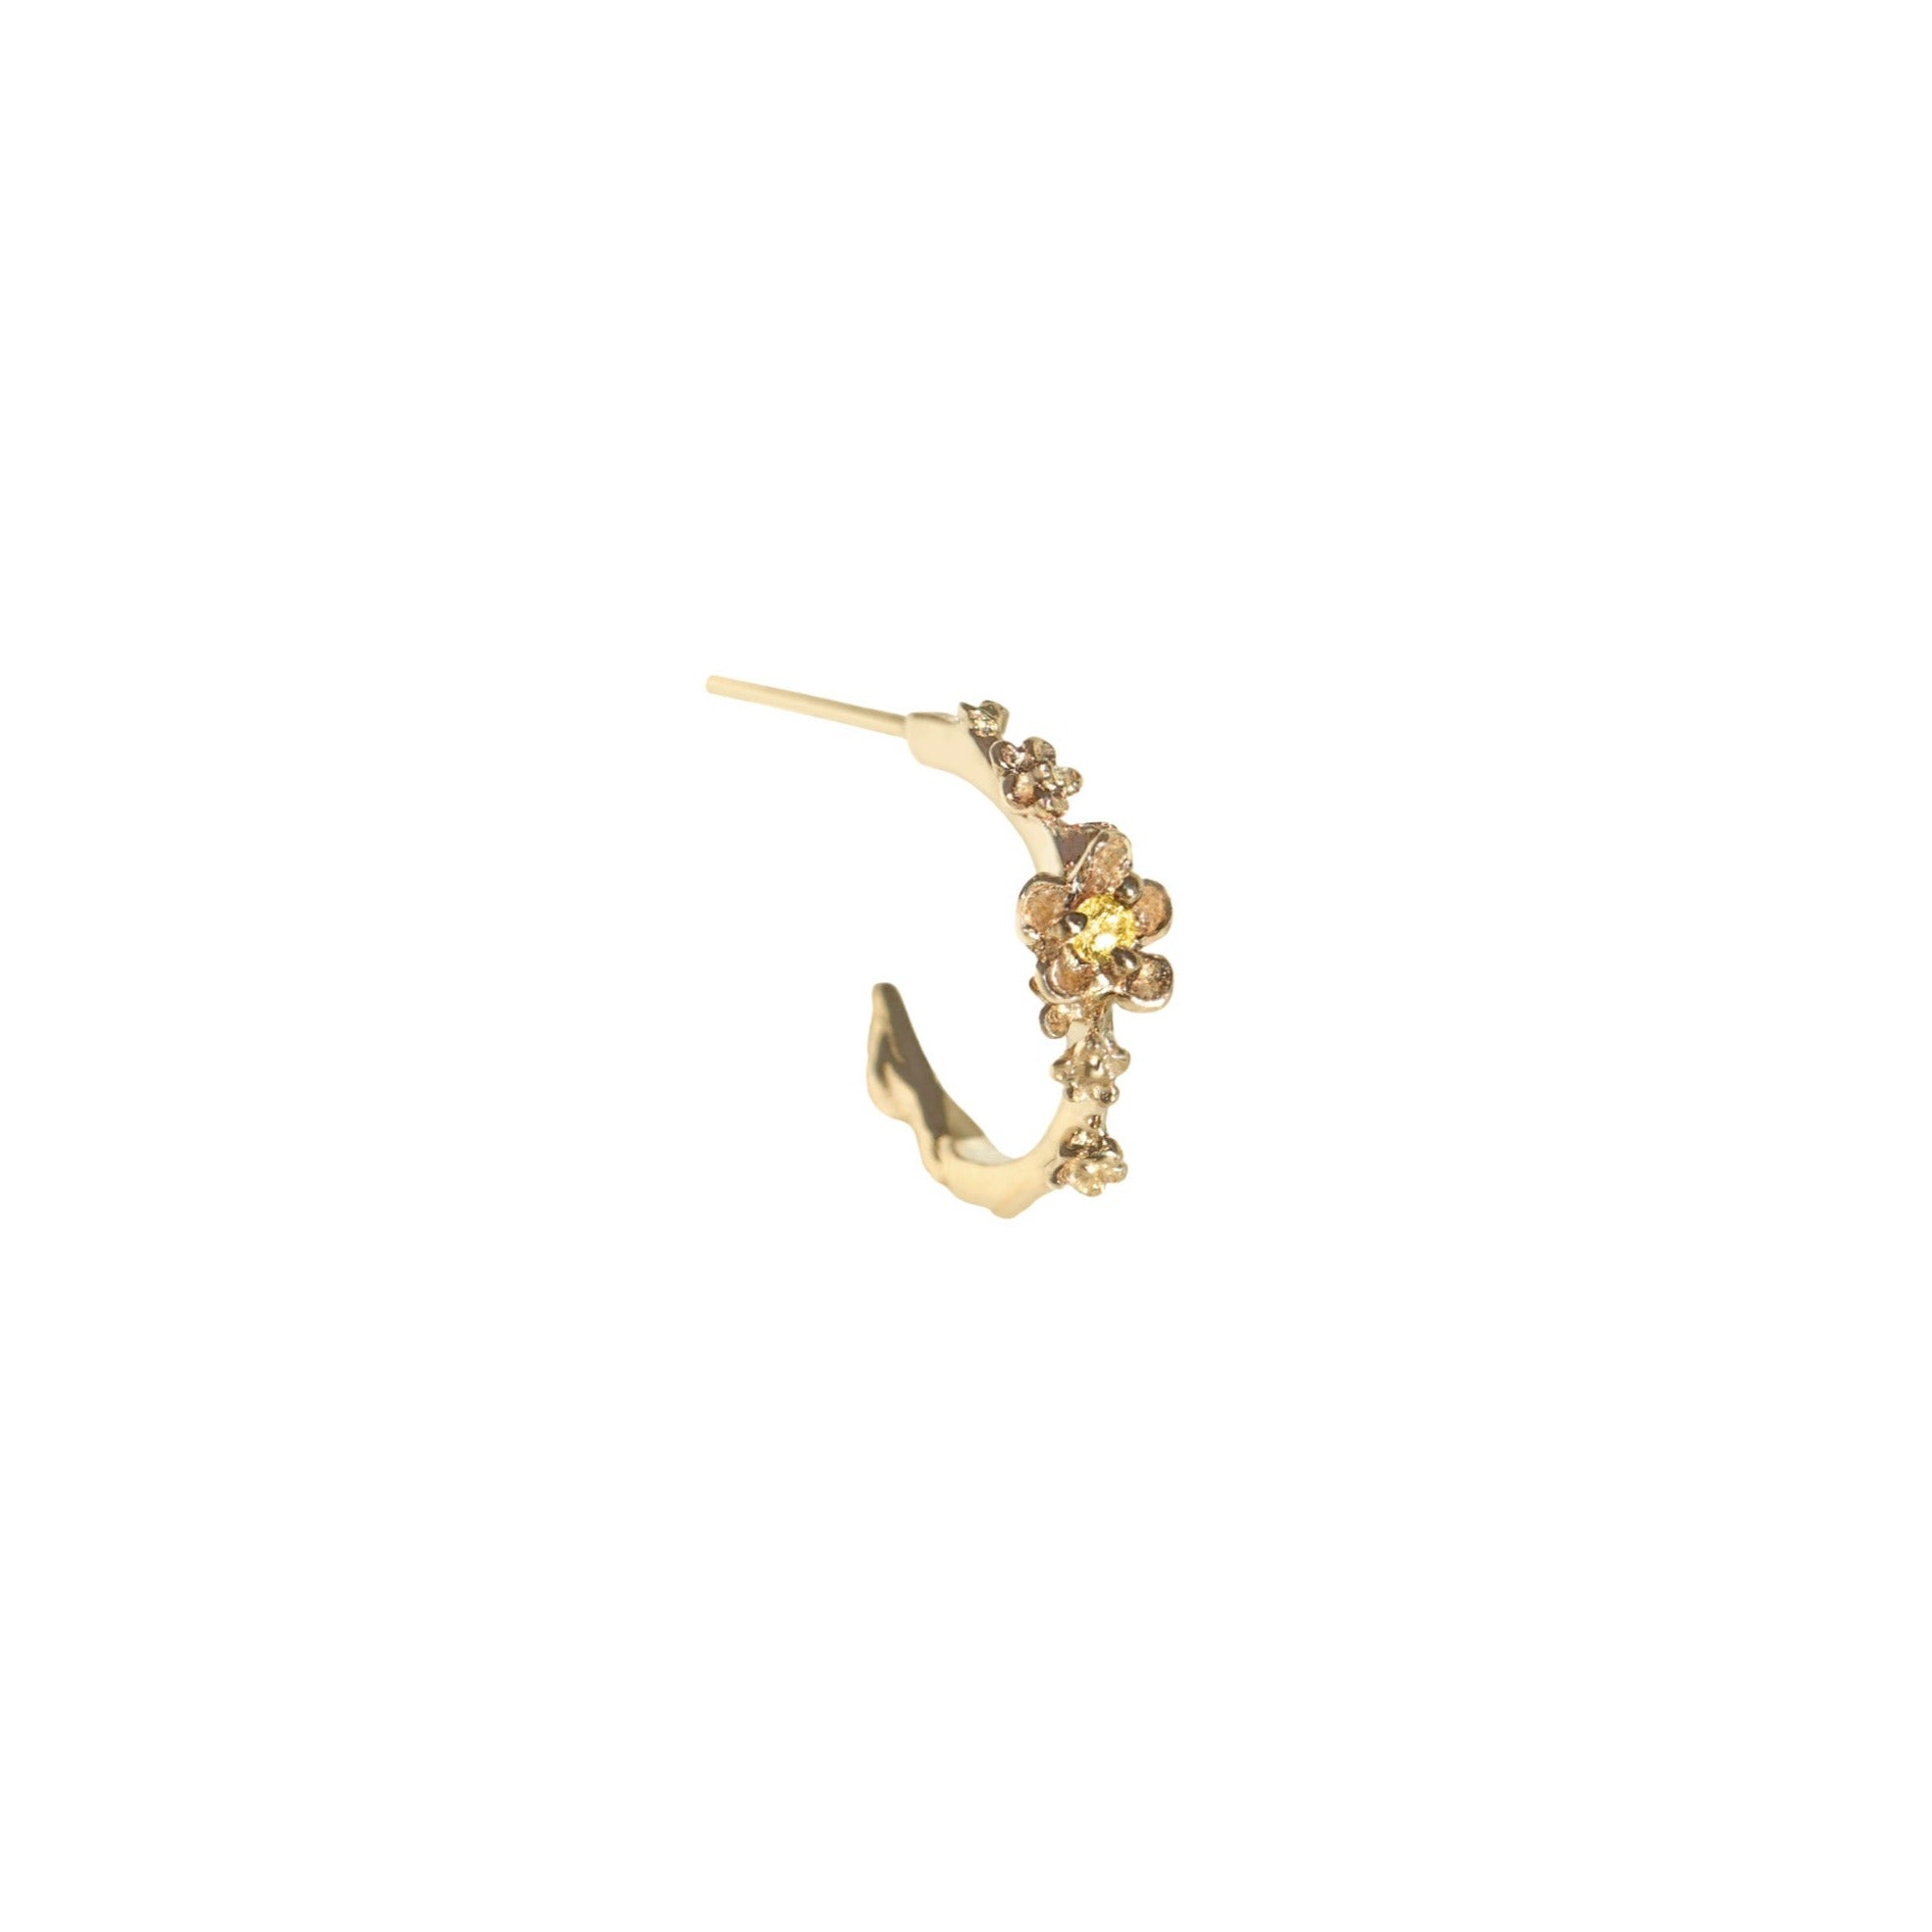 Laurie Fleming Jewellery "Small Buttercup Hoop" earring, featuring petite hand-carved buttercup flowers with a yellow sapphire centre. The earring is on a white background.